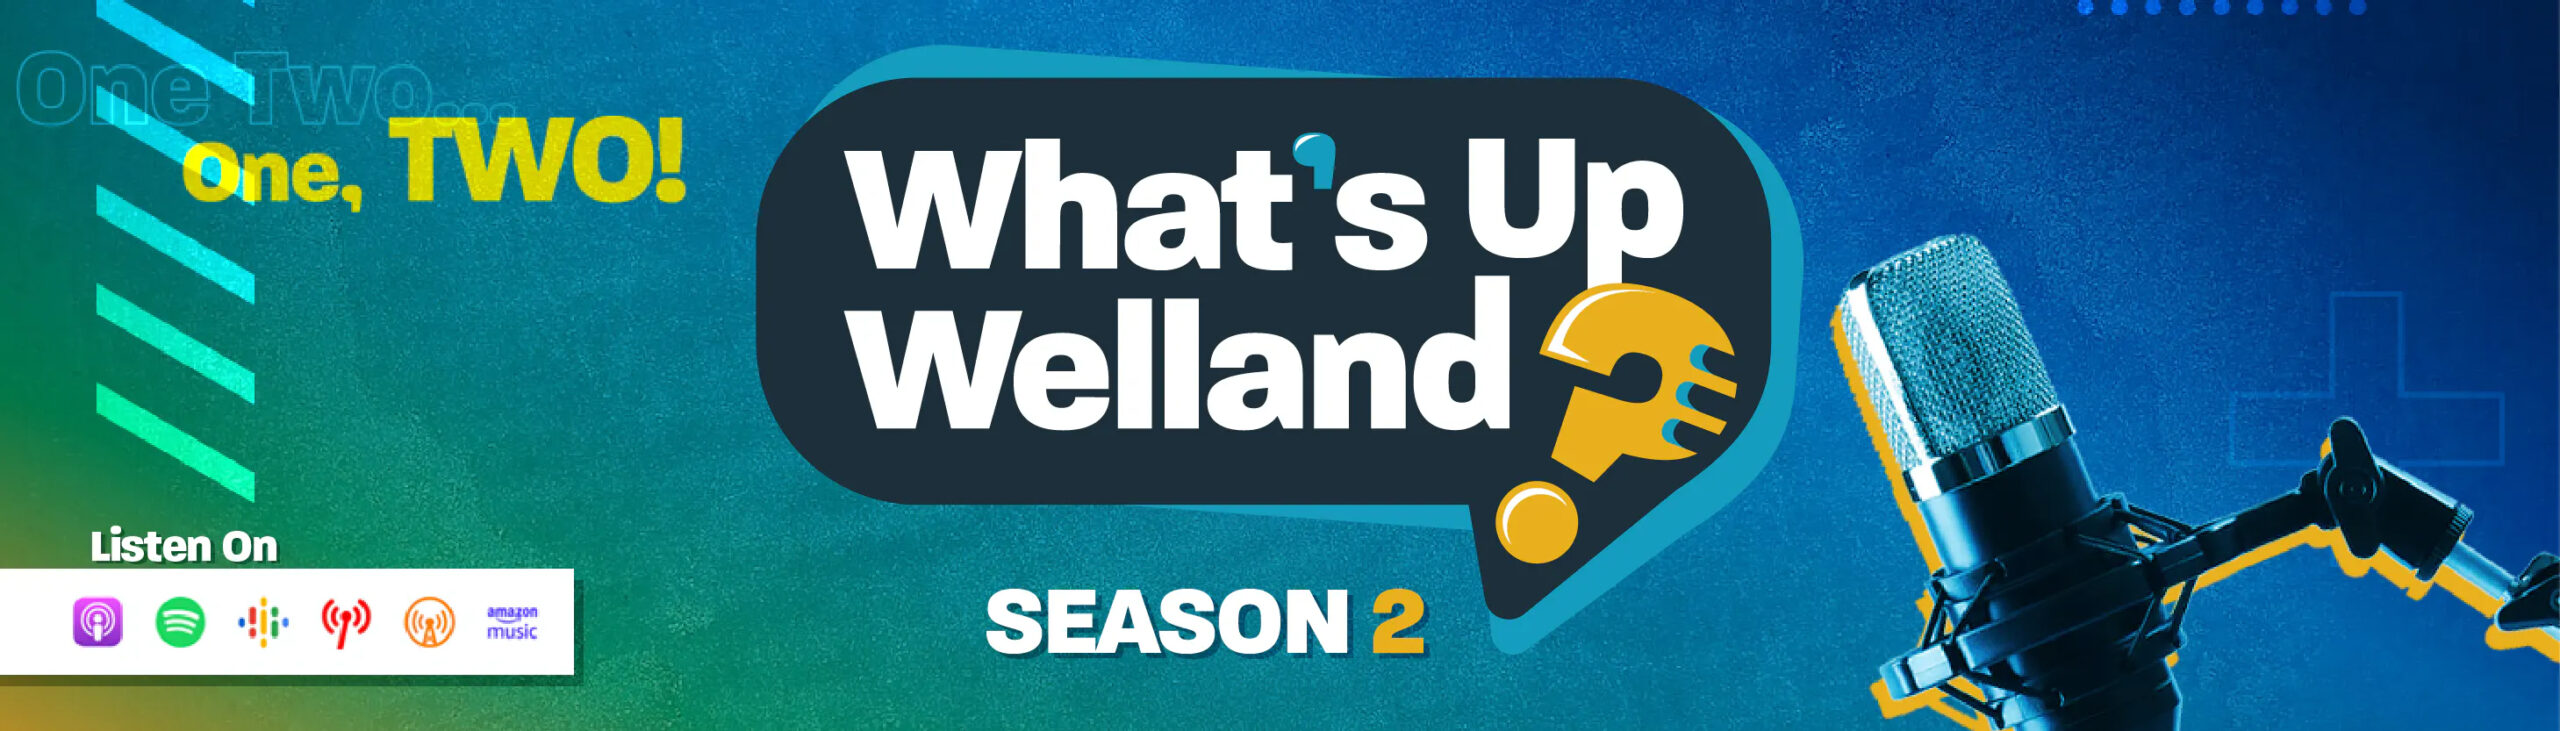 Season 2 of What’s Up, Welland?